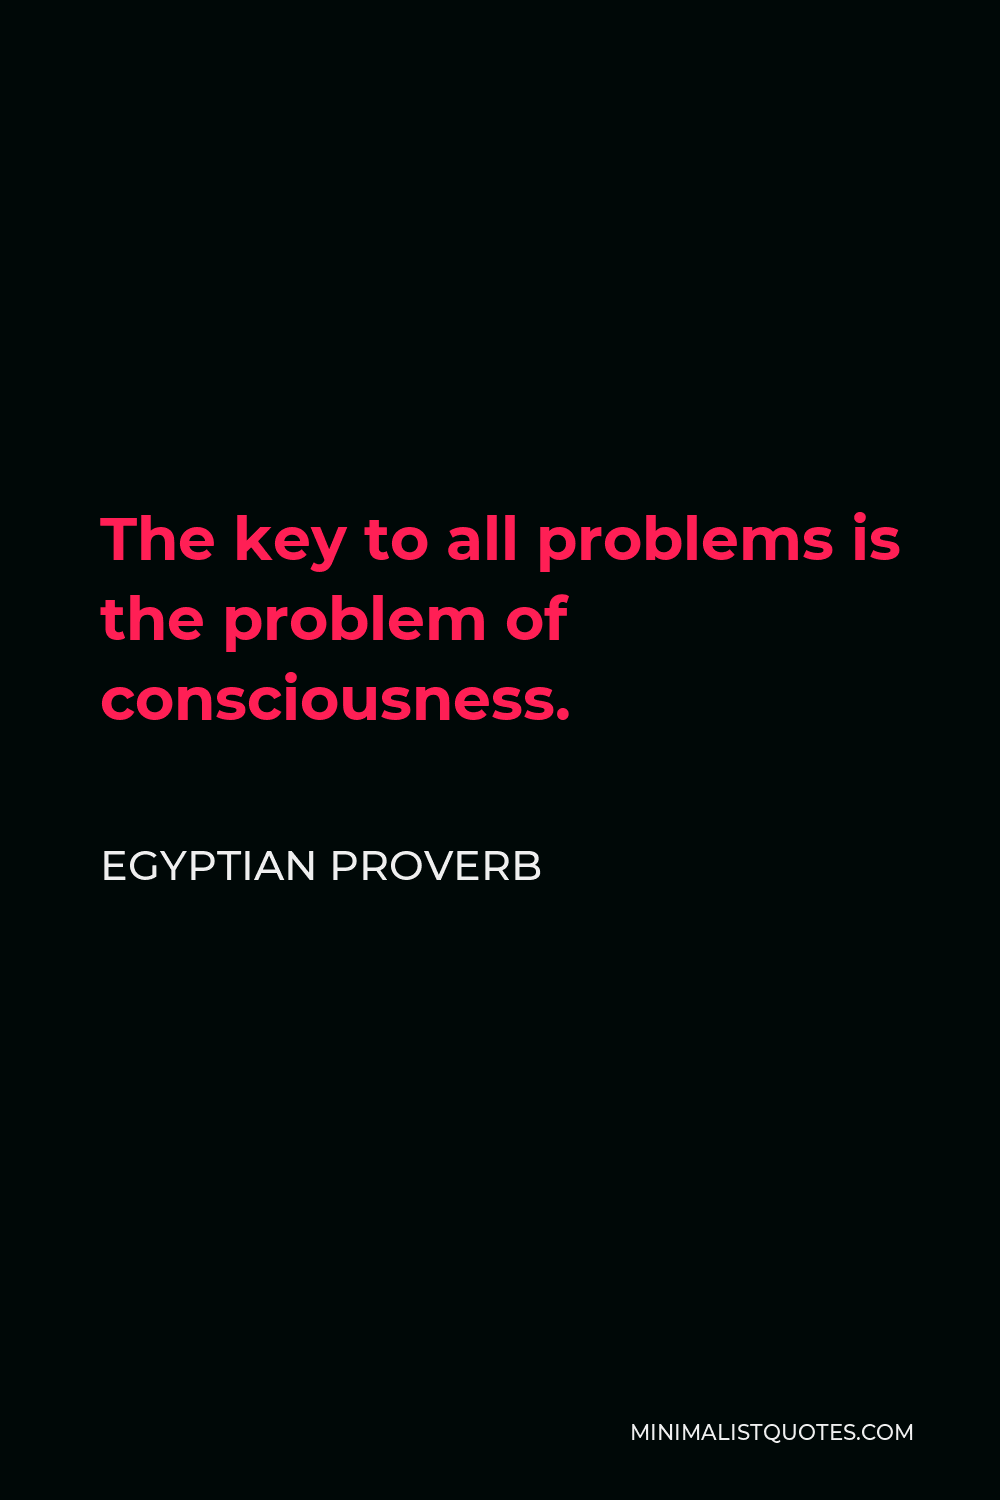 Egyptian Proverb Quote - The key to all problems is the problem of consciousness.